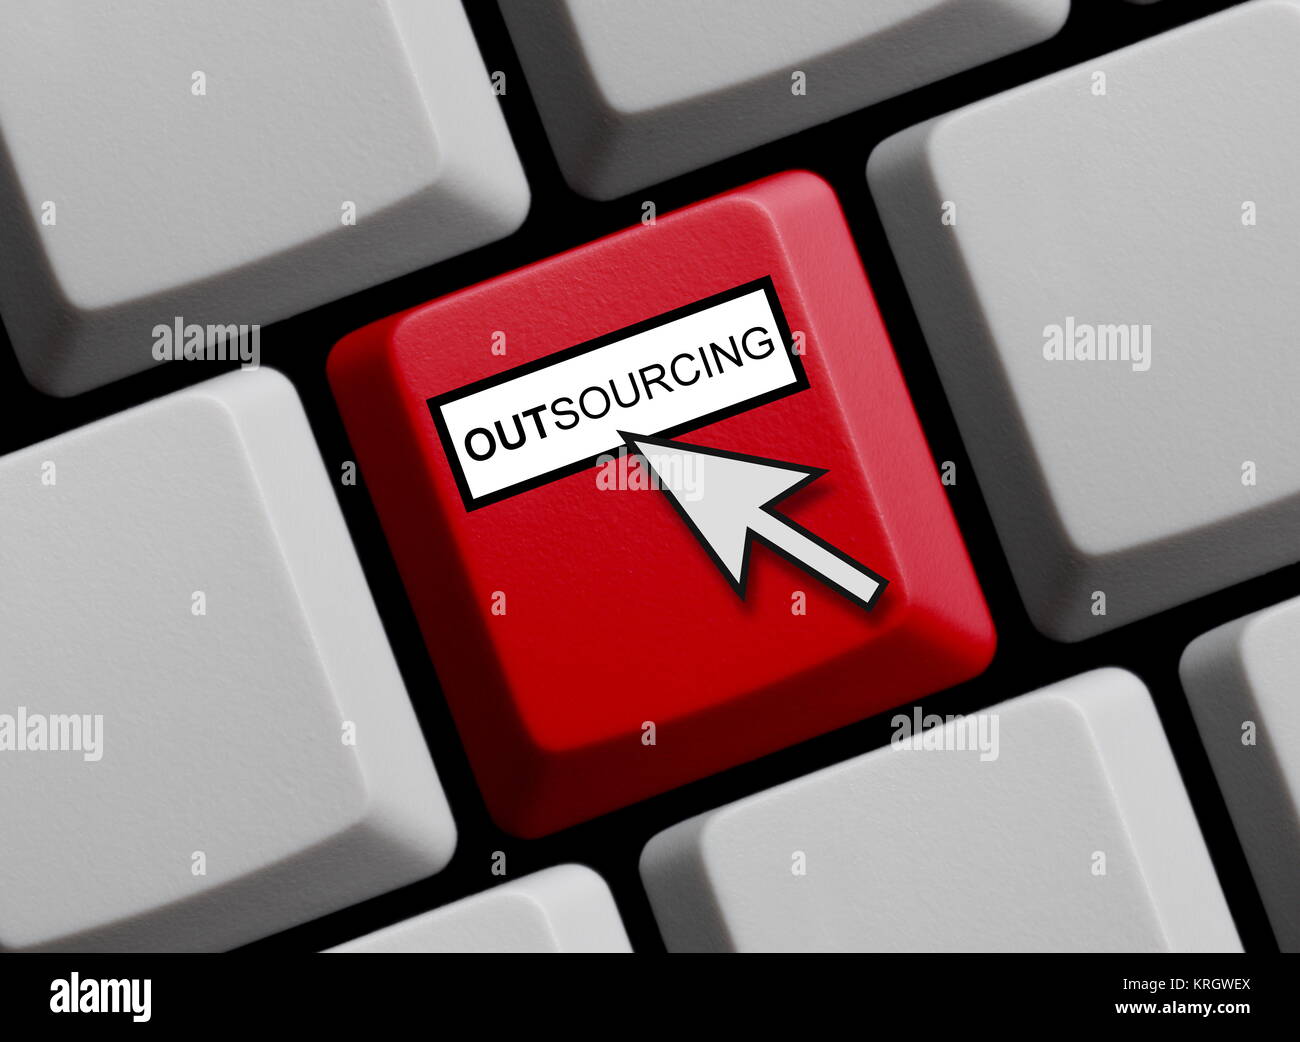 keyboard with mouse arrow pointing outsourcing Stock Photo